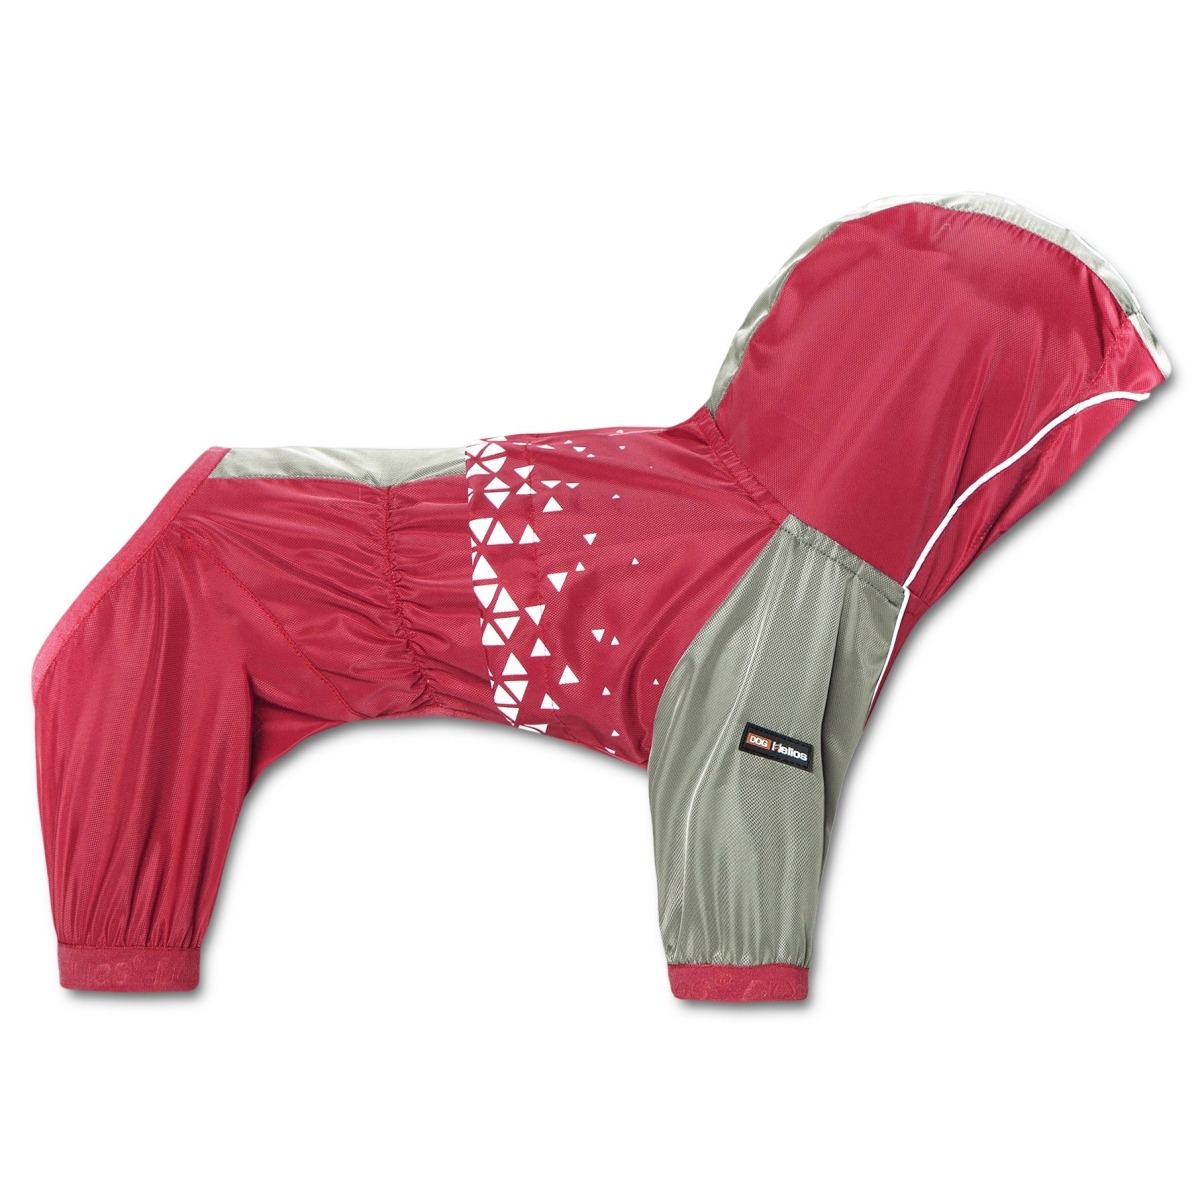 Picture of Dog Helios JKHL15RDSM Vortex Full Bodied Waterproof Windbreaker Dog Jacket - Red - Small